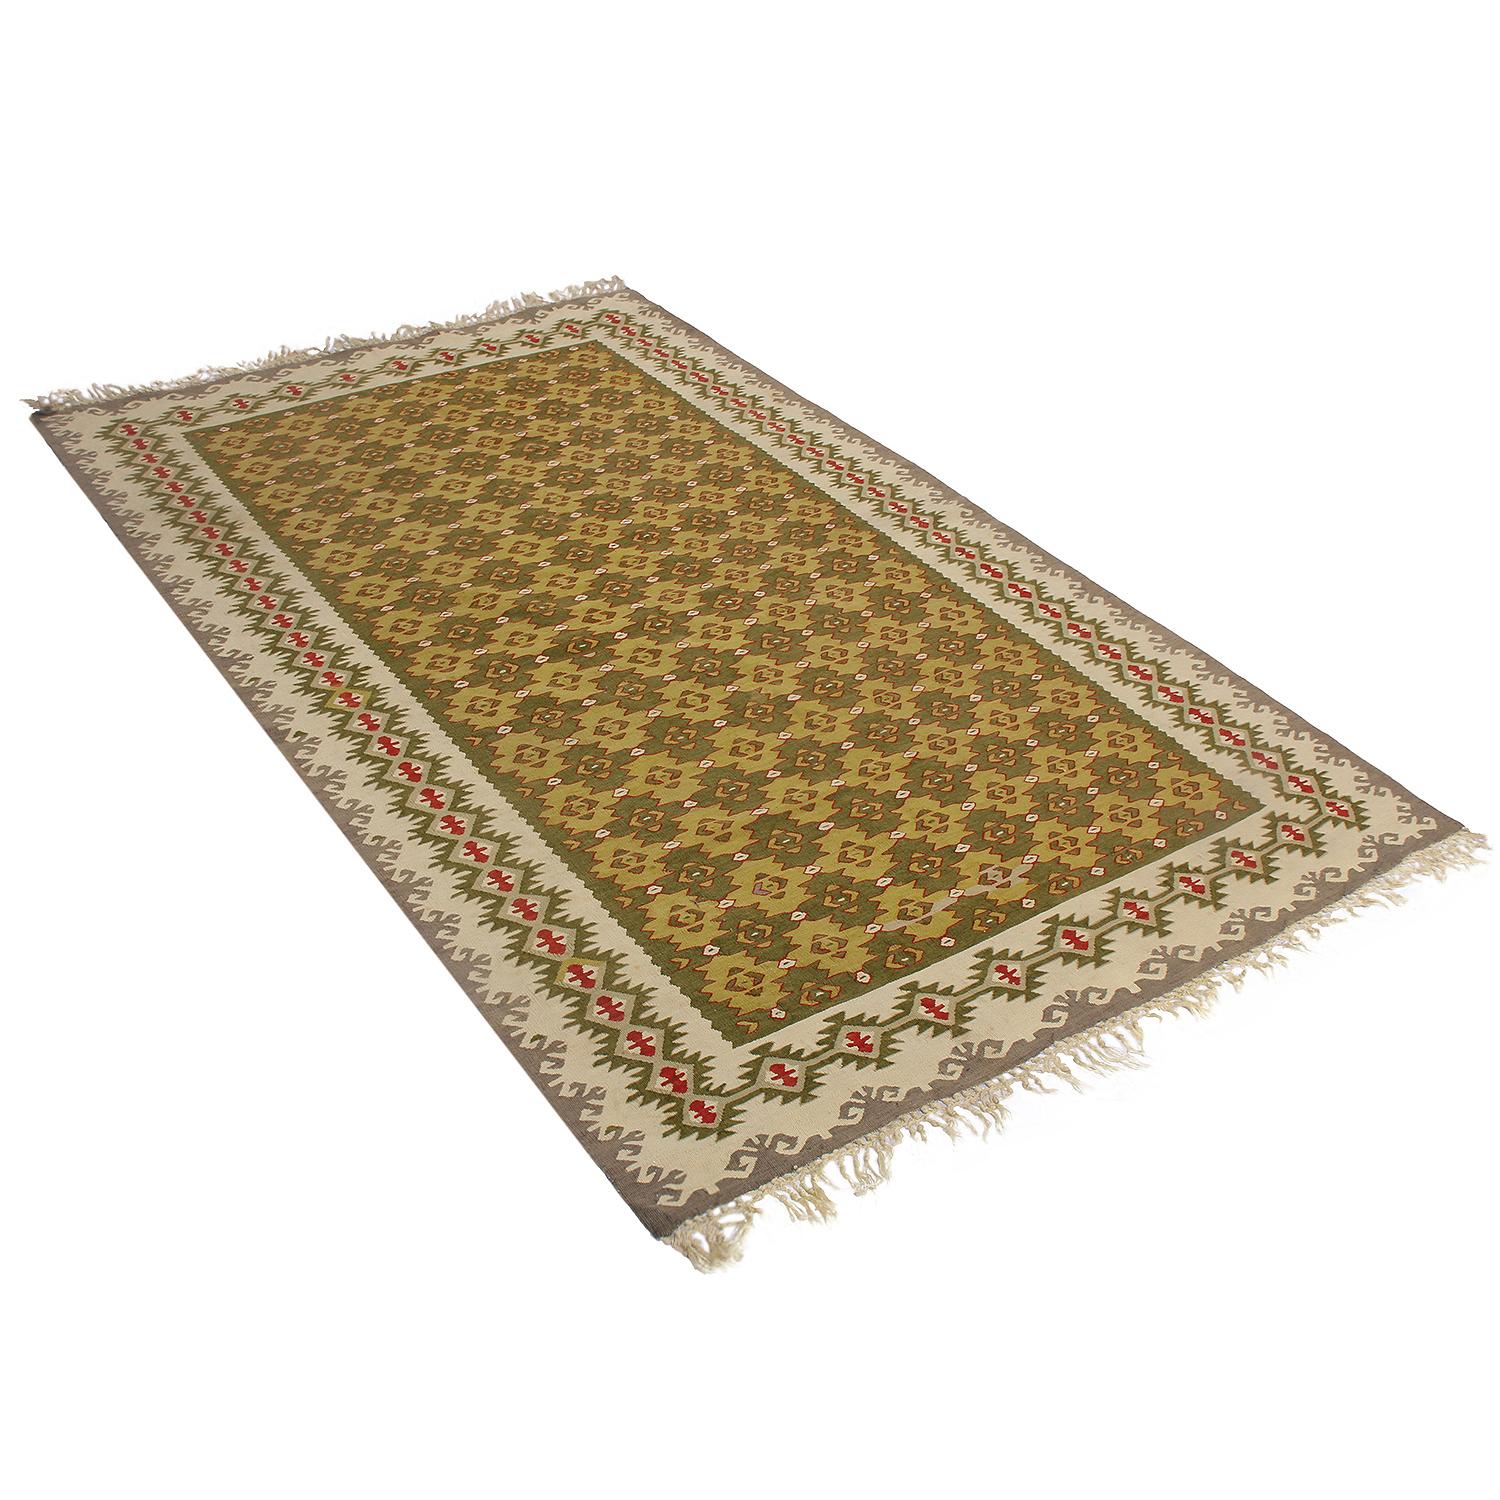 Handwoven in Turkey originating between 1950-1960, this vintage midcentury wool Kilim hails from the seaside town of Sarkoy (Sarköy). The repetition of the geometric field pattern plays well off the alternating hues of forest and olive green, given